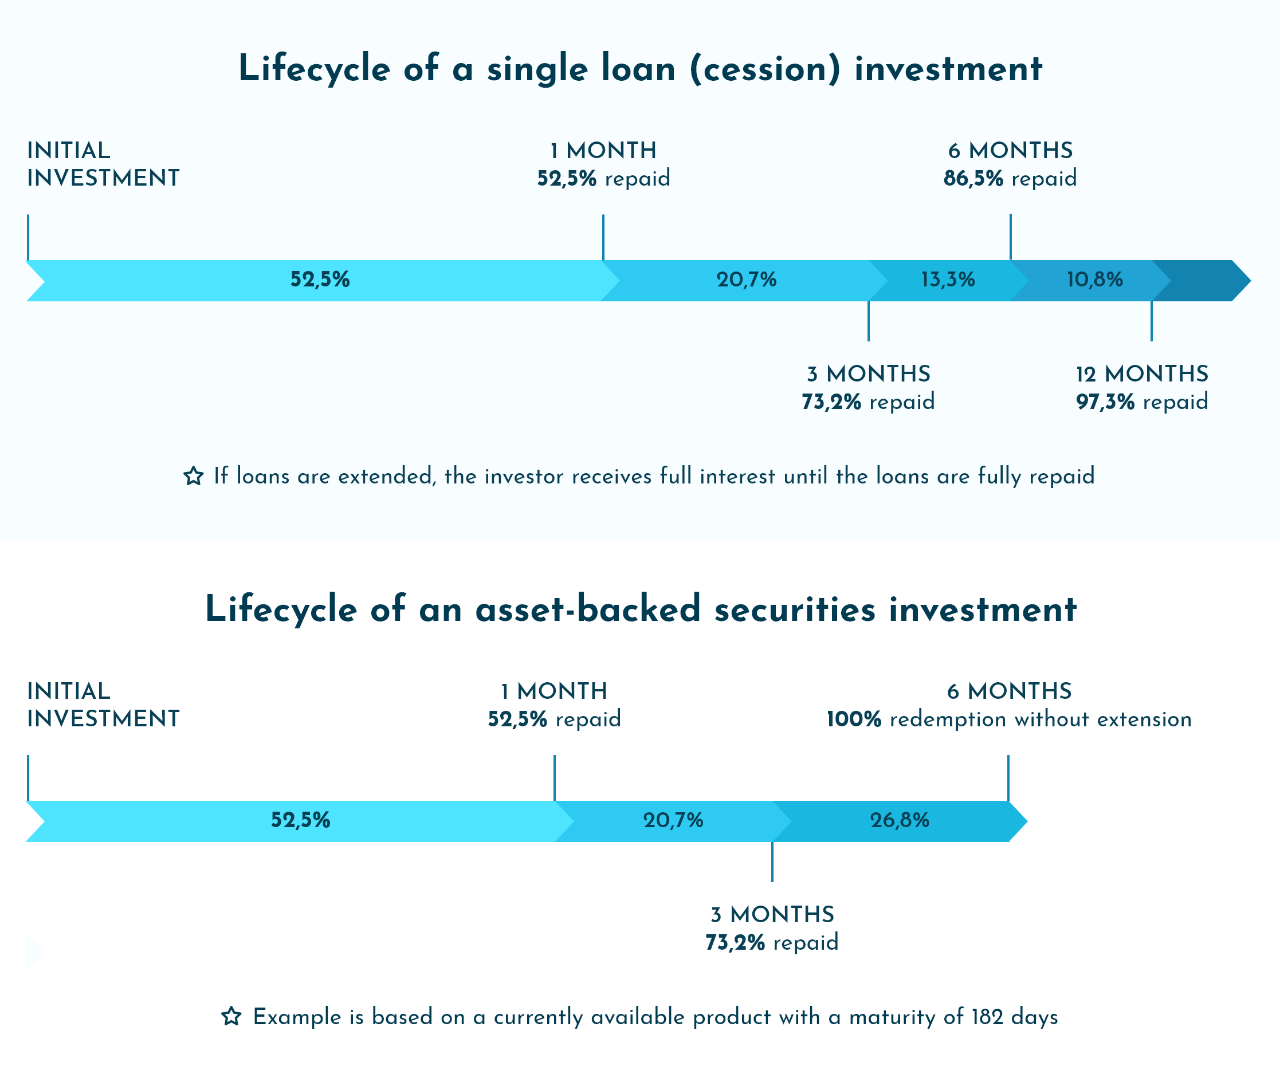 Maturity Term Of Single Loans Compared To Asset-Backed securities